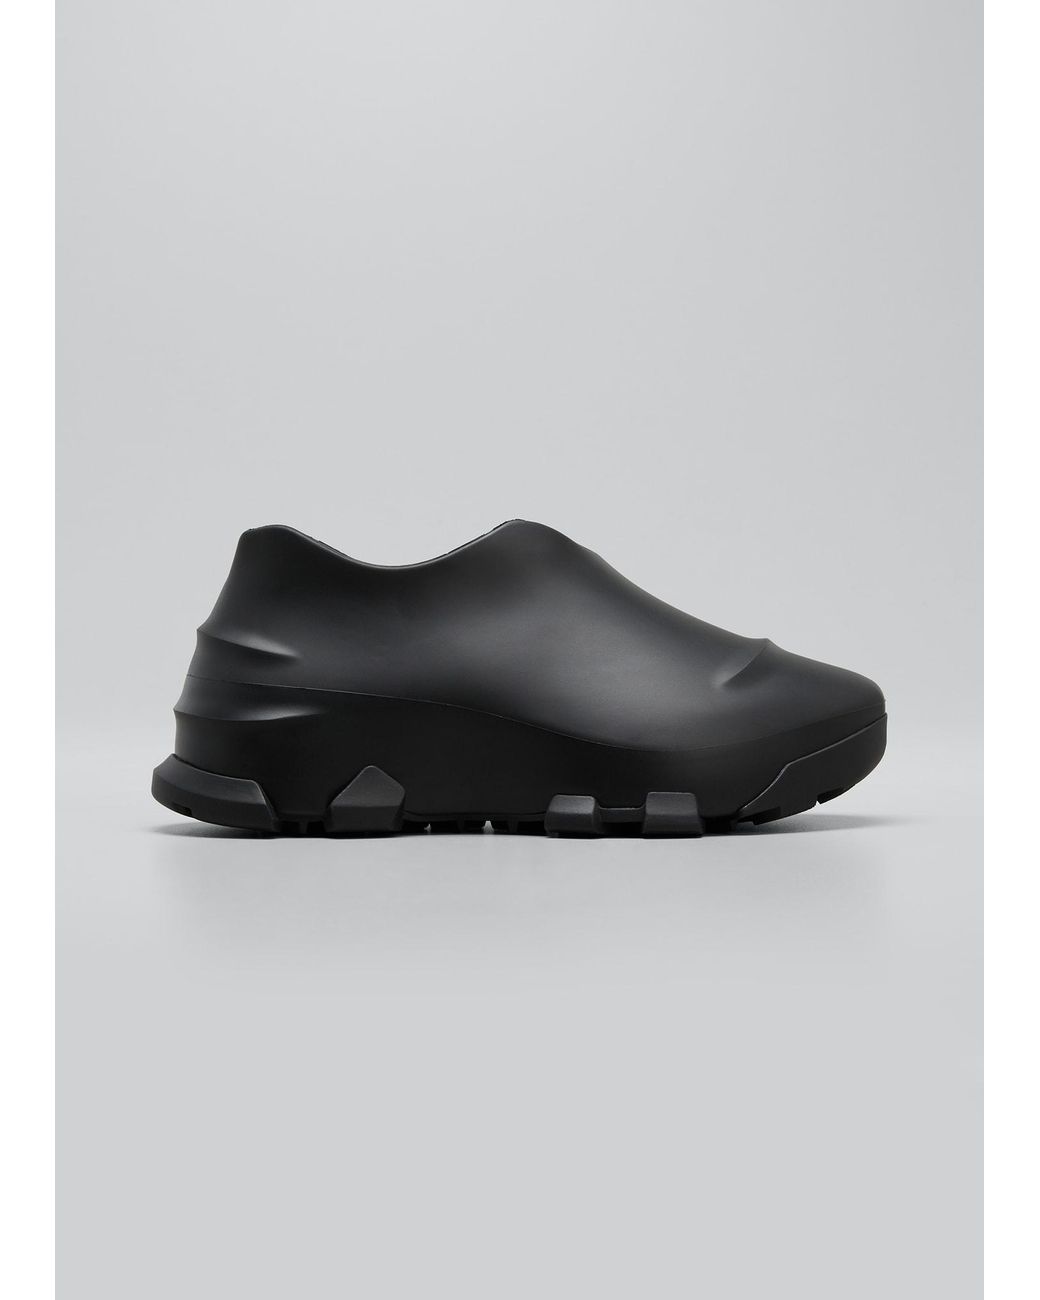 Givenchy Monumental Mallow Low Rubber Sneakers in Black | Lyst